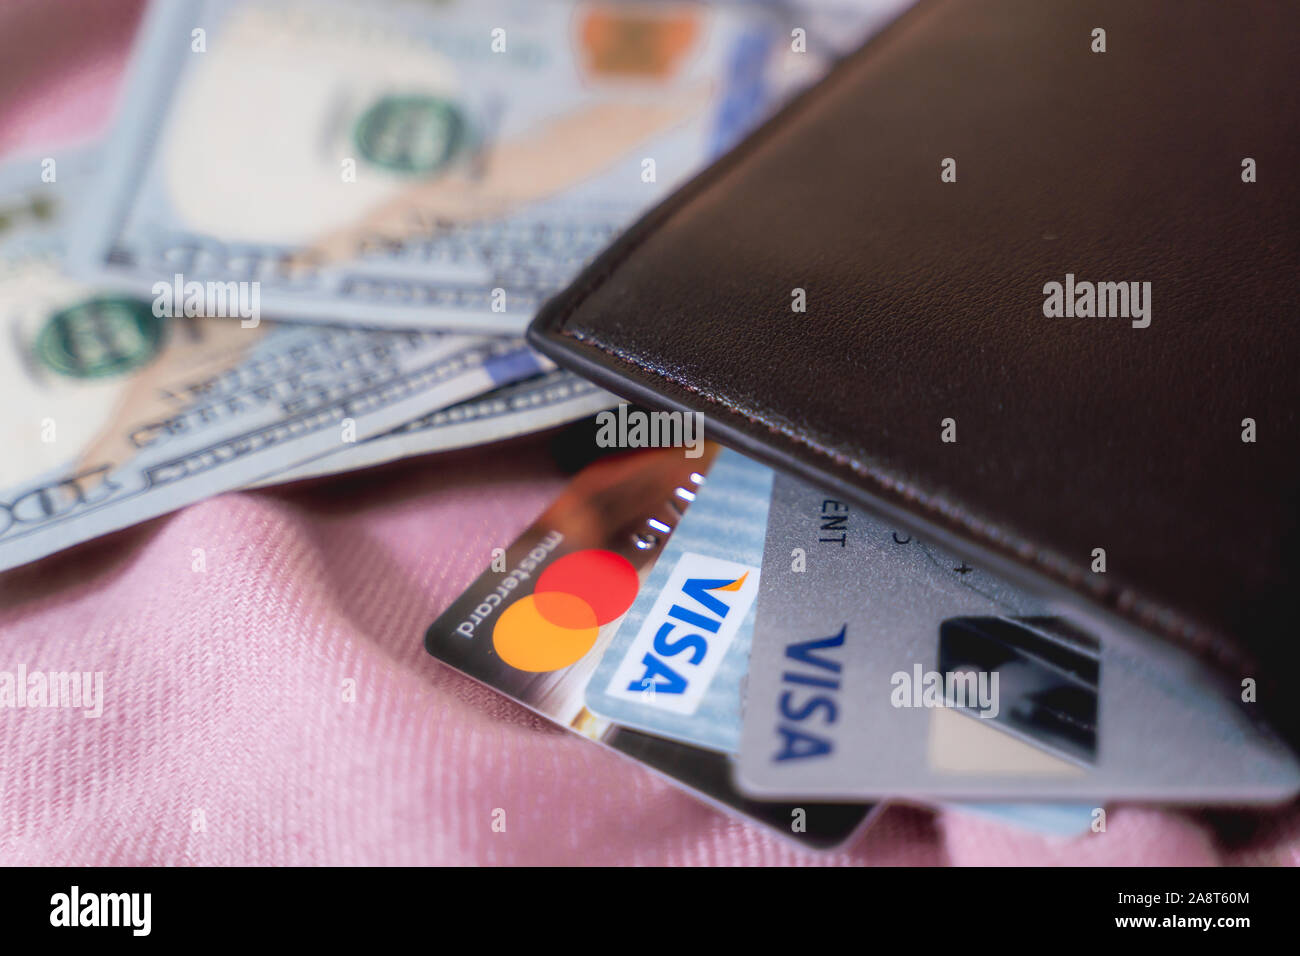 Marinette Wi U S A Nov1 2019 The Pocket Money Collected In The Credit Card Visa Mastercard With100 Dollar Bills Money Saving Growth To Prof Stock Photo Alamy